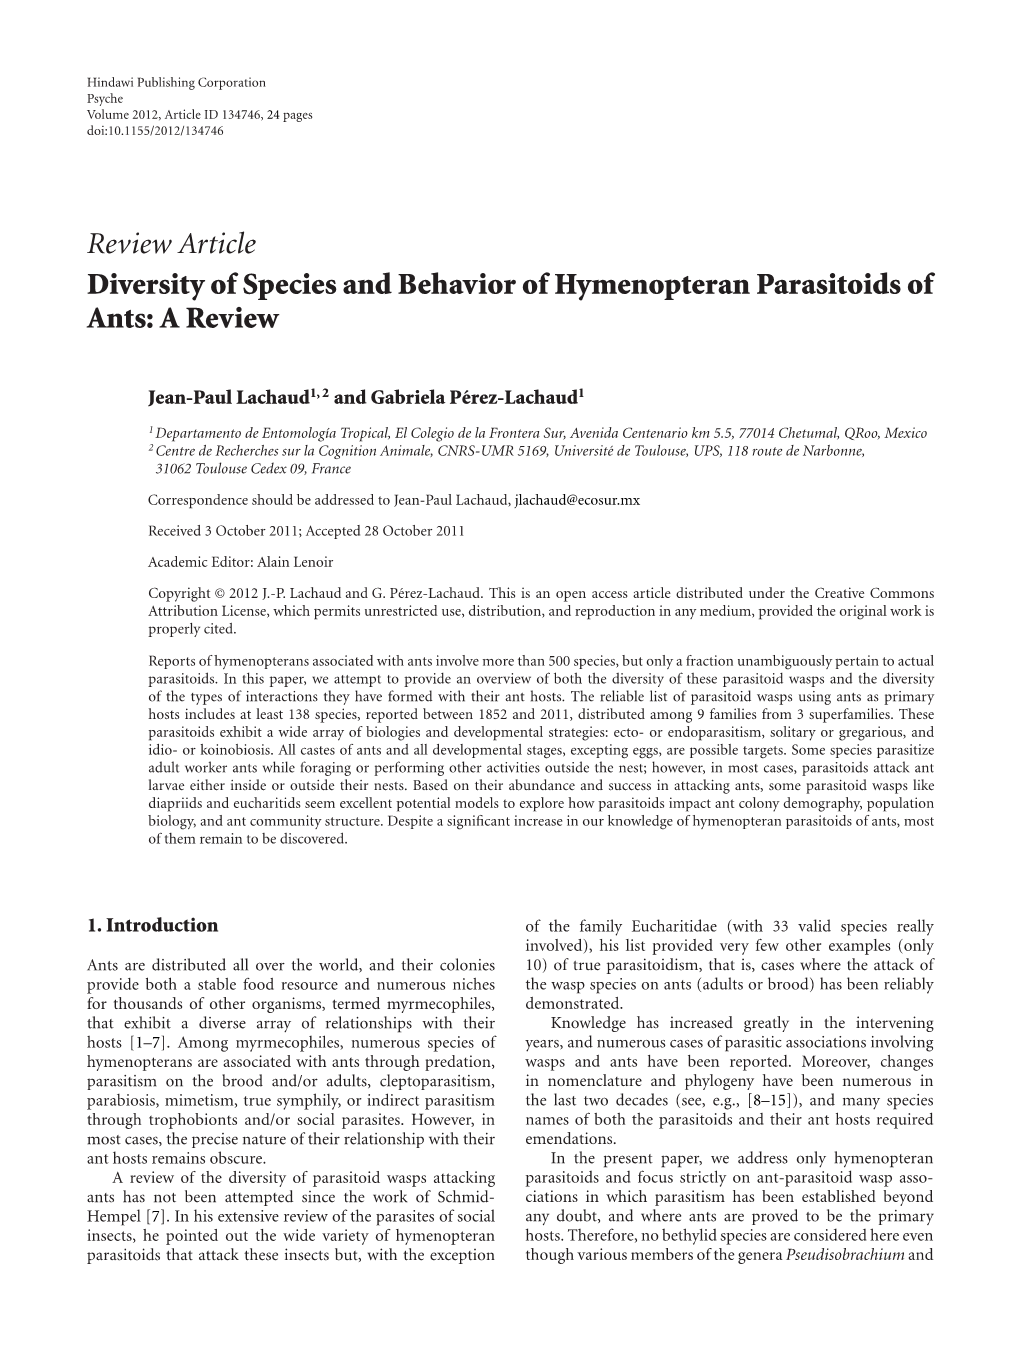 Diversity of Species and Behavior of Hymenopteran Parasitoids of Ants: a Review